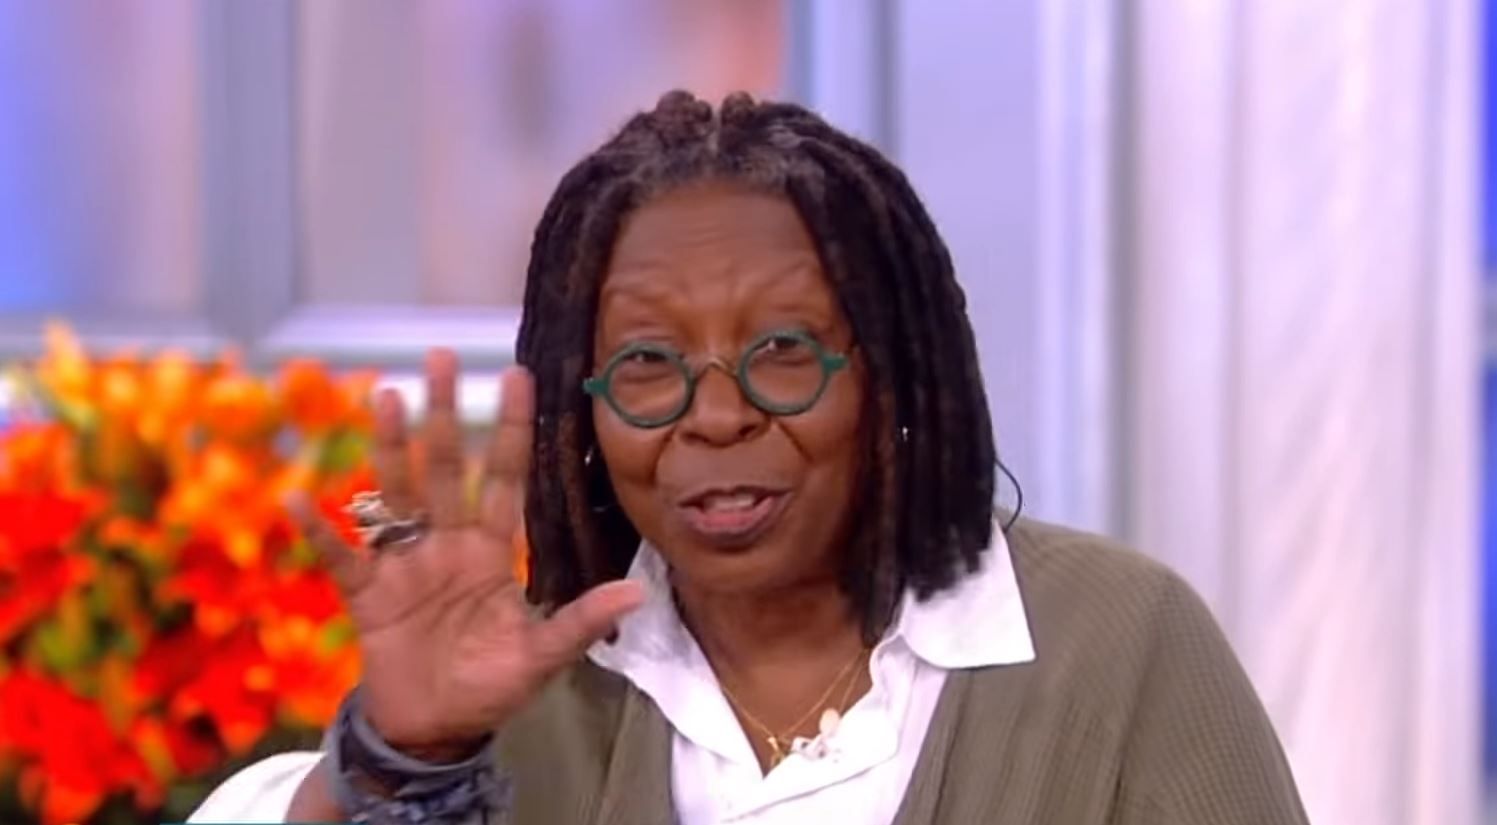 Whoopi Goldberg Reveals The Plan For The Next 'Sister Act' Movie And She's Not Happy